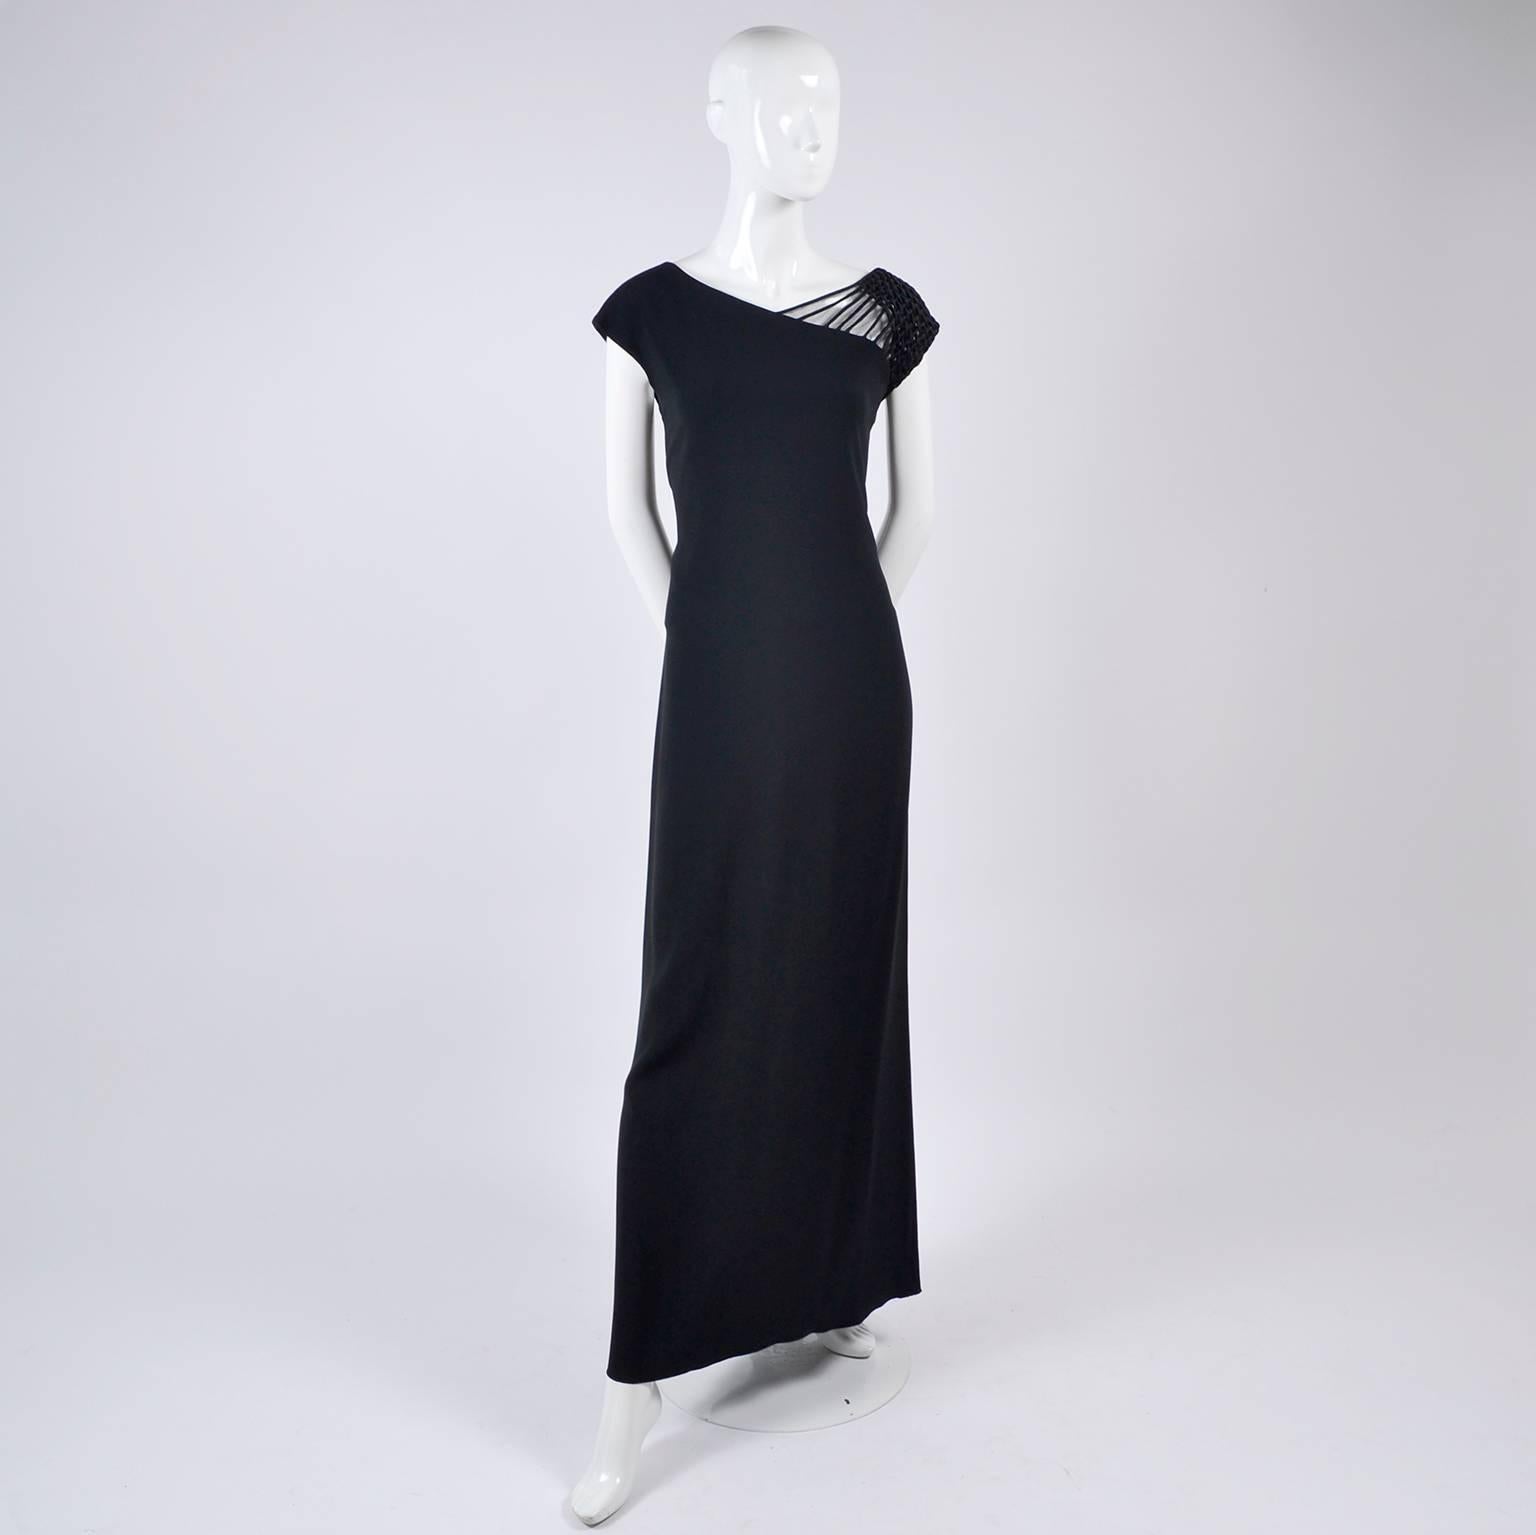 Women's 1990s Valentino Dress Black Crepe Evening Gown With Woven Shoulder Details